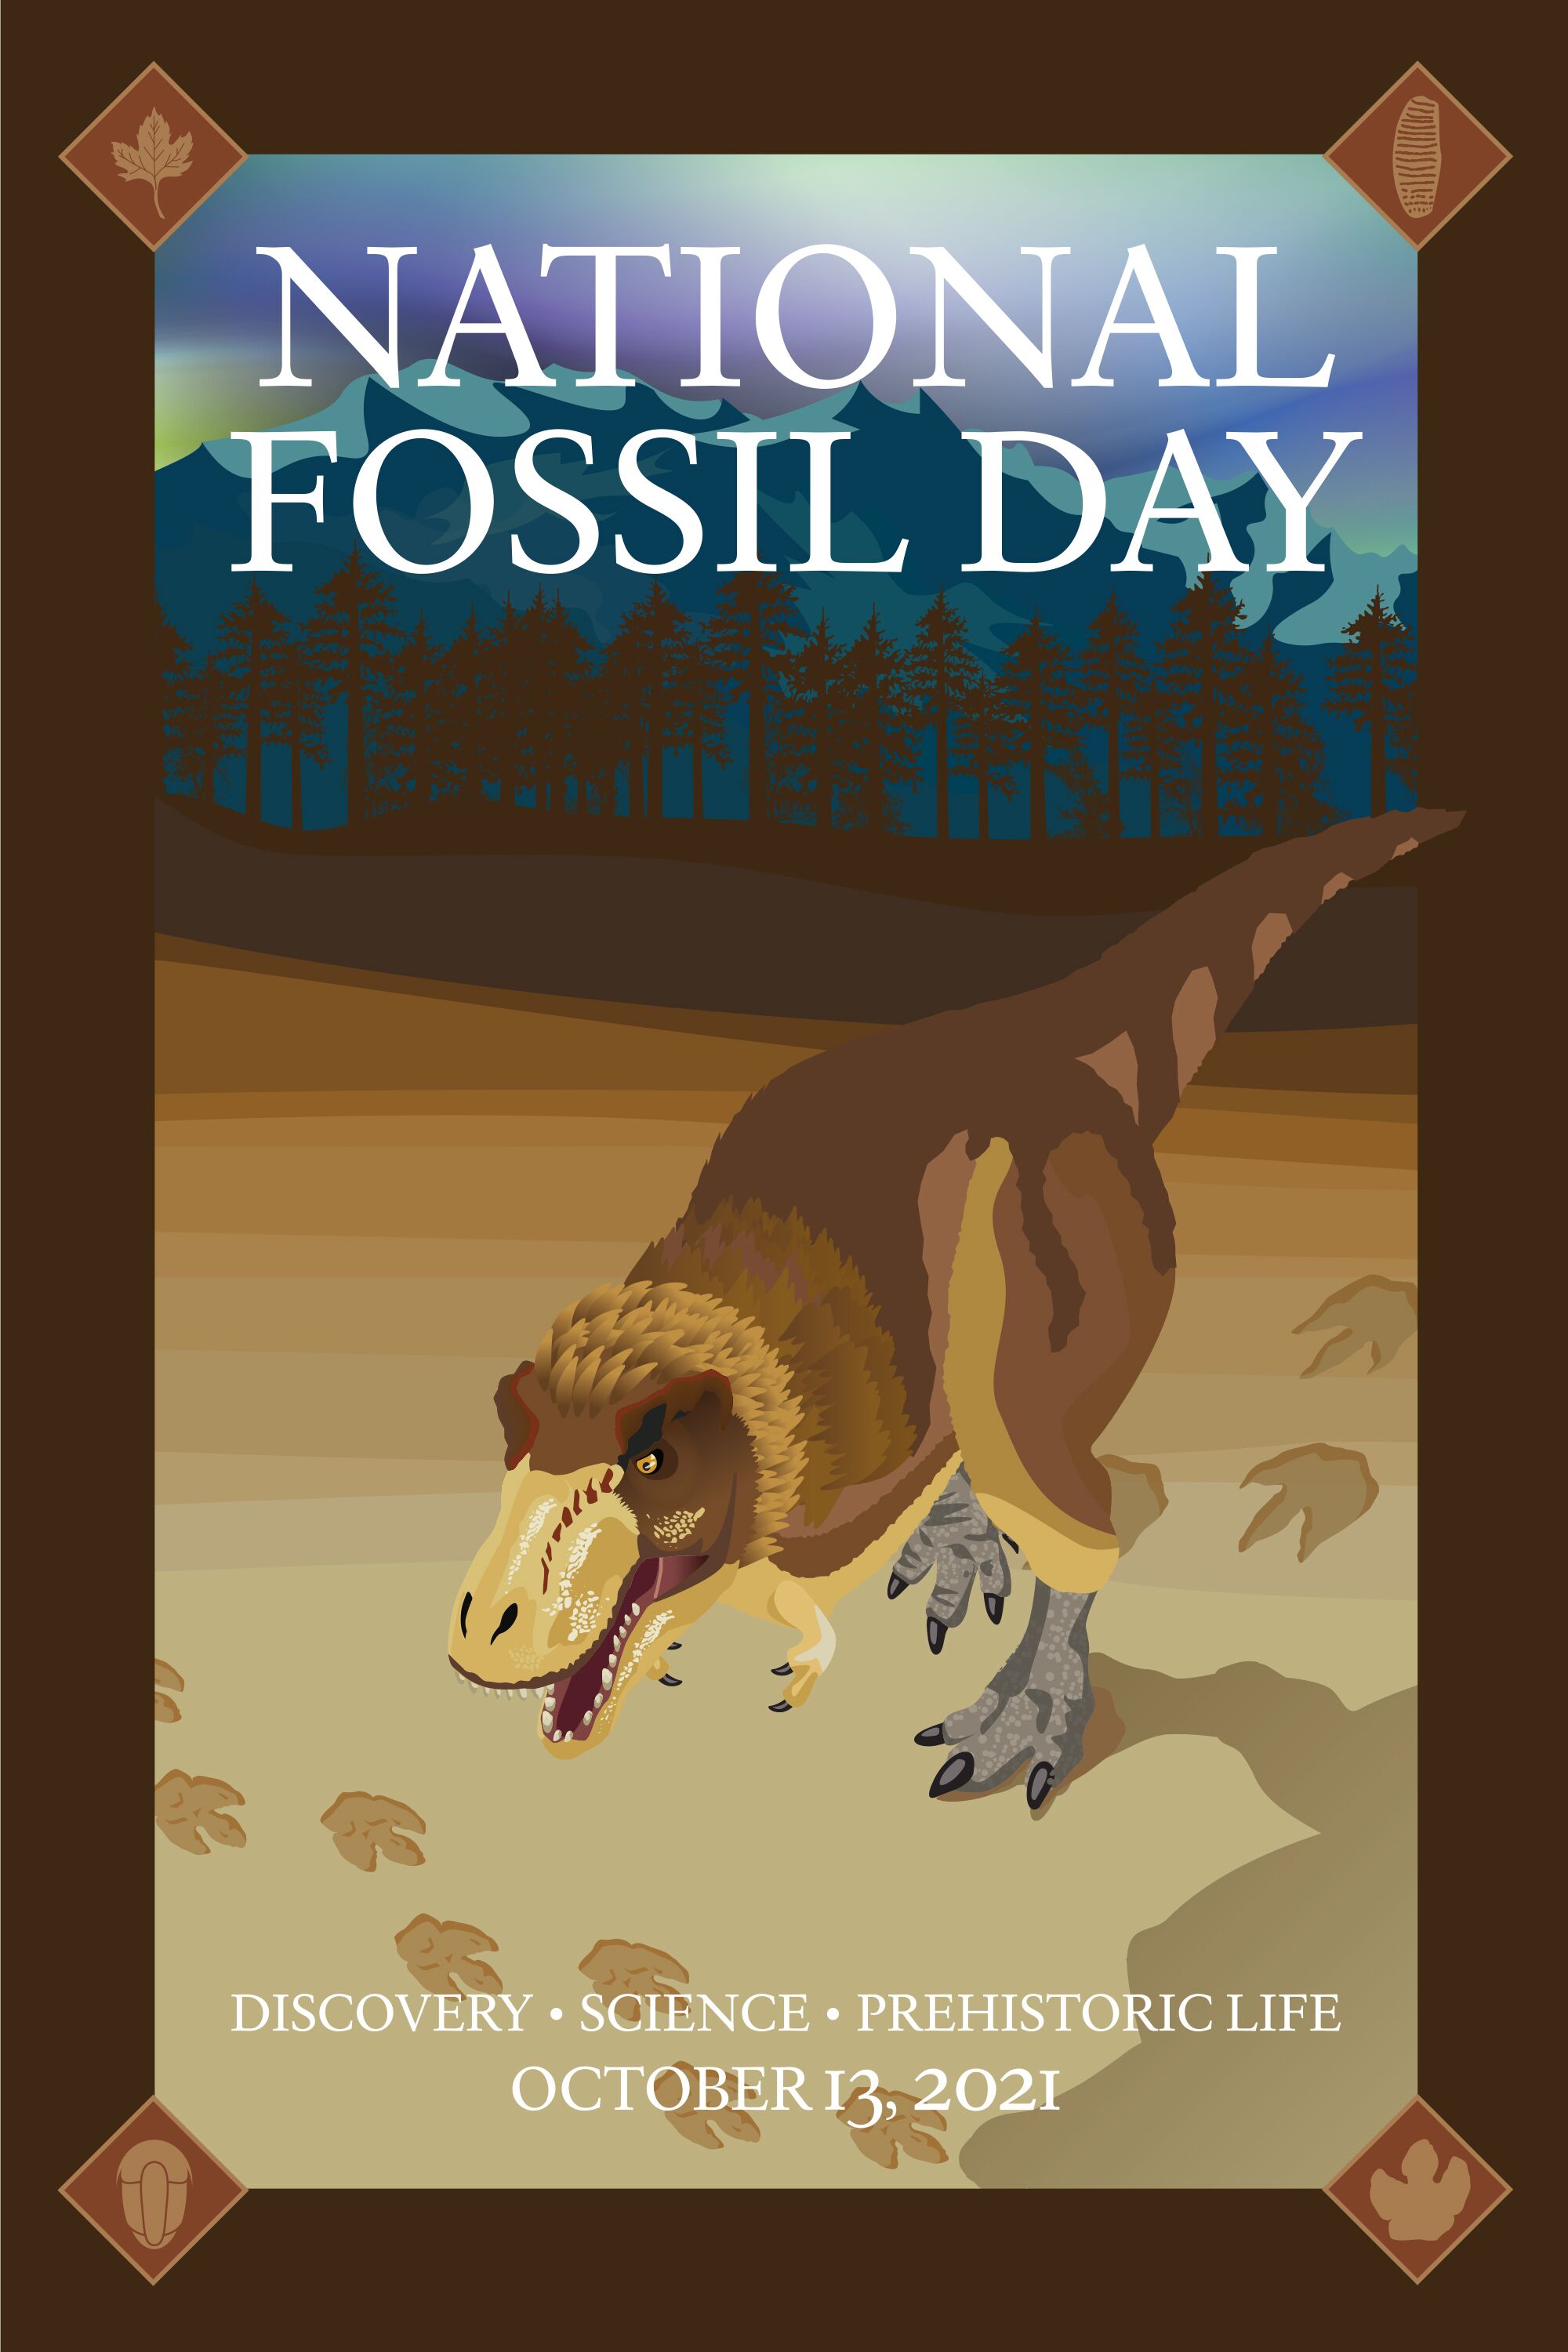 Fossils of the 2021 National Fossil Day Artwork (U.S. National Park